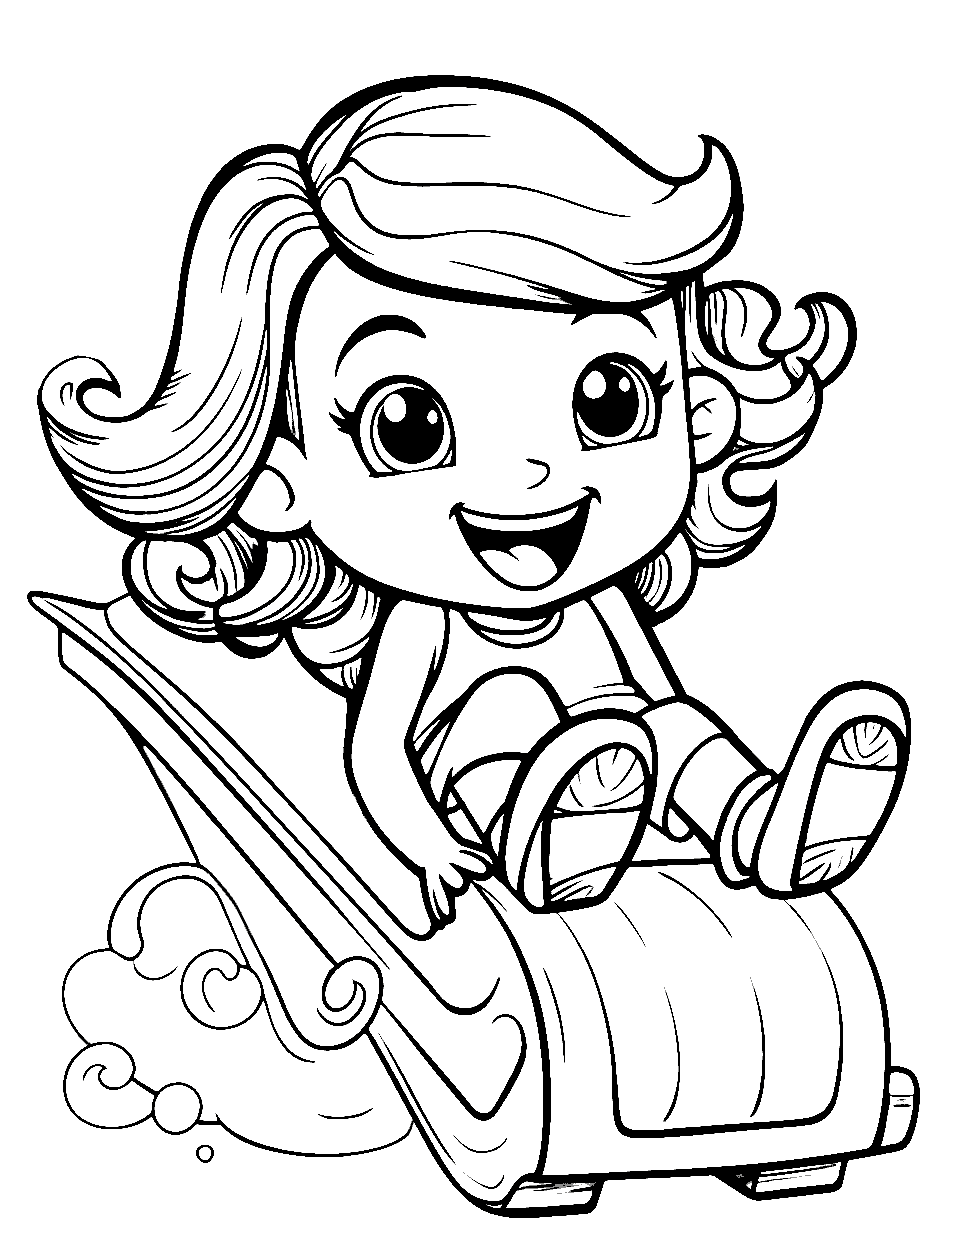 Sled Fun Coloring Page - A Shopkin sliding around on a sled.